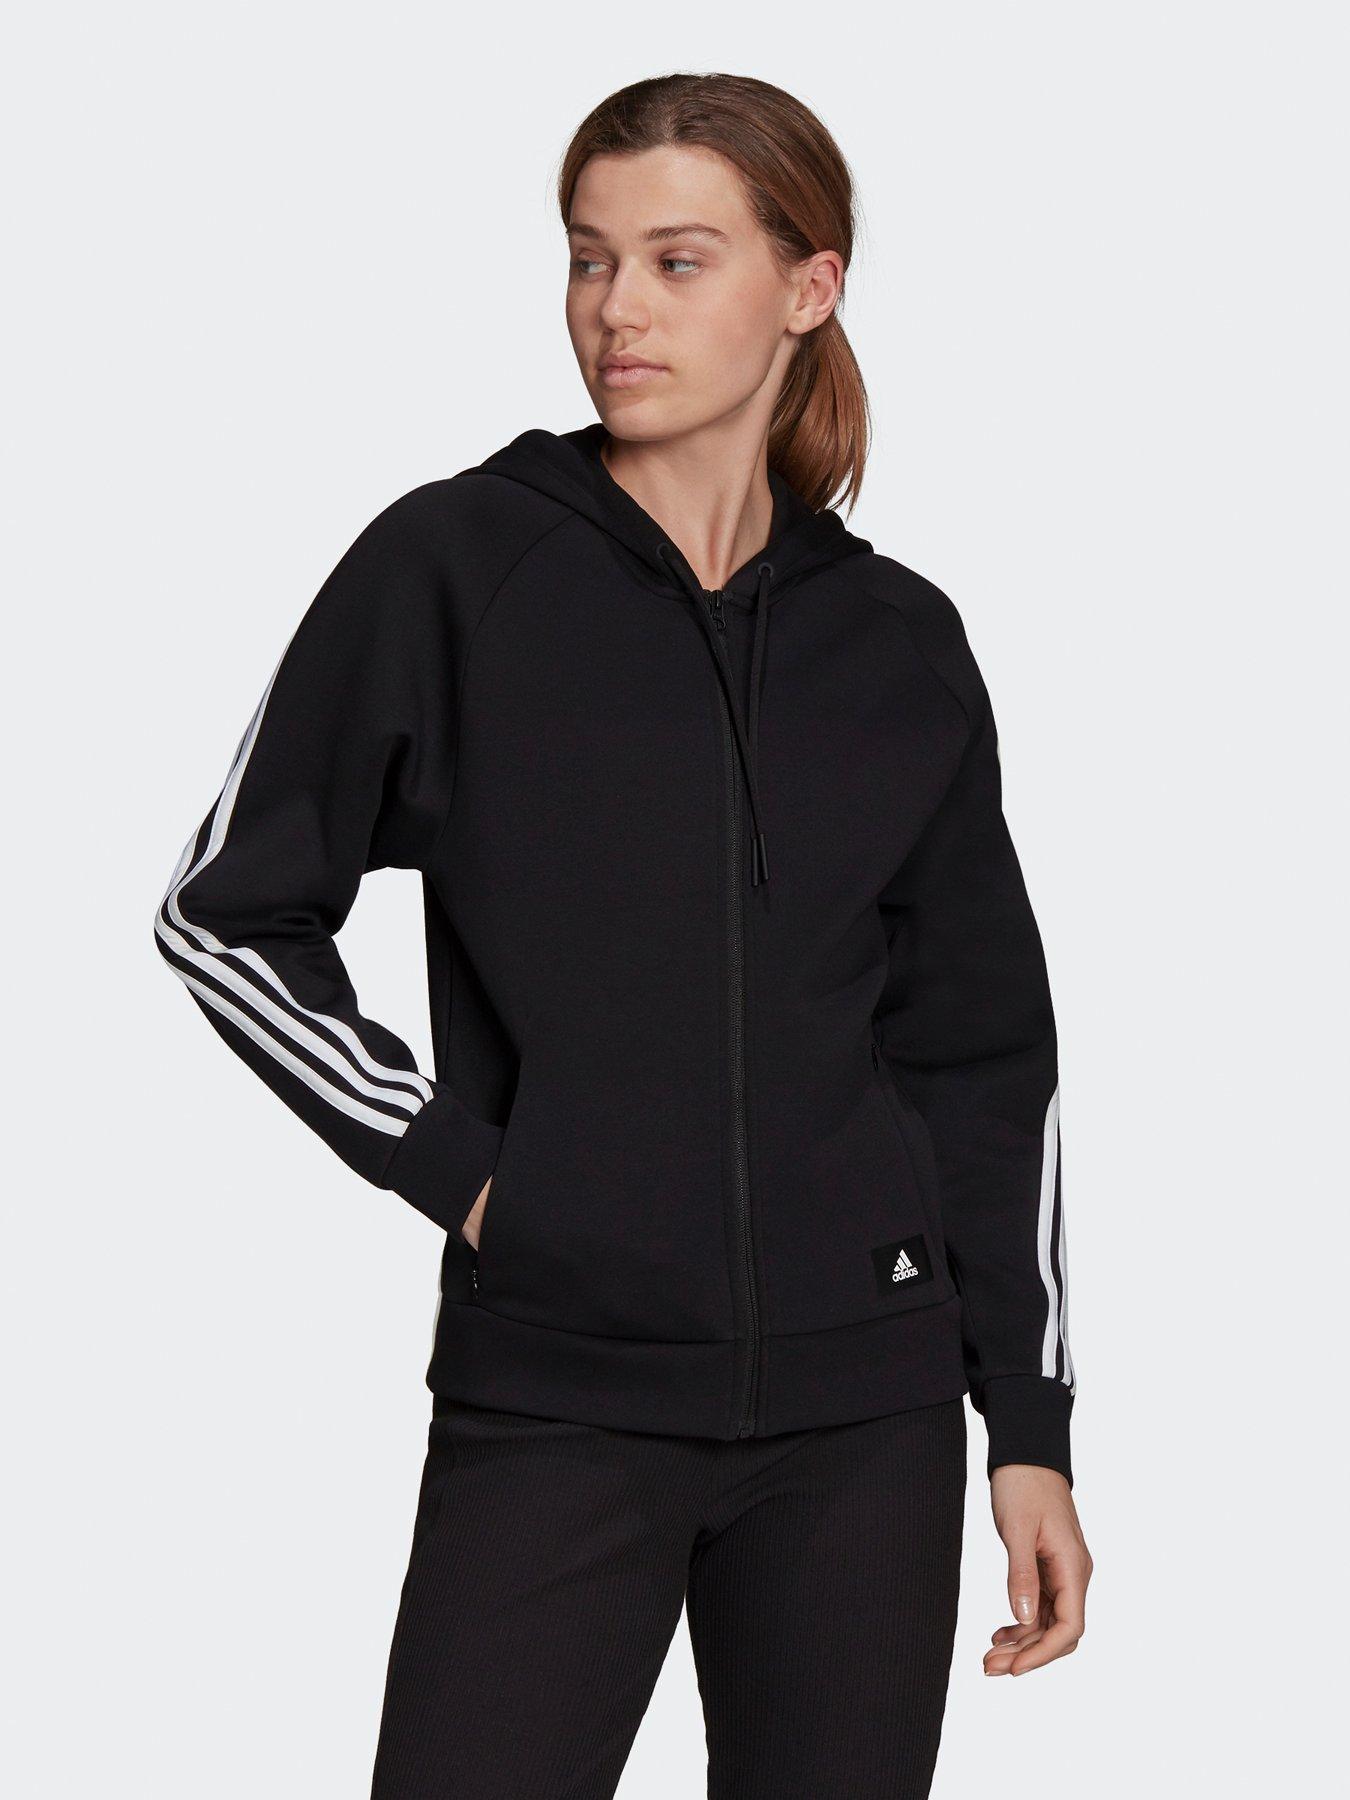 Women Sportswear Future Icons 3-stripes Hooded Track Top